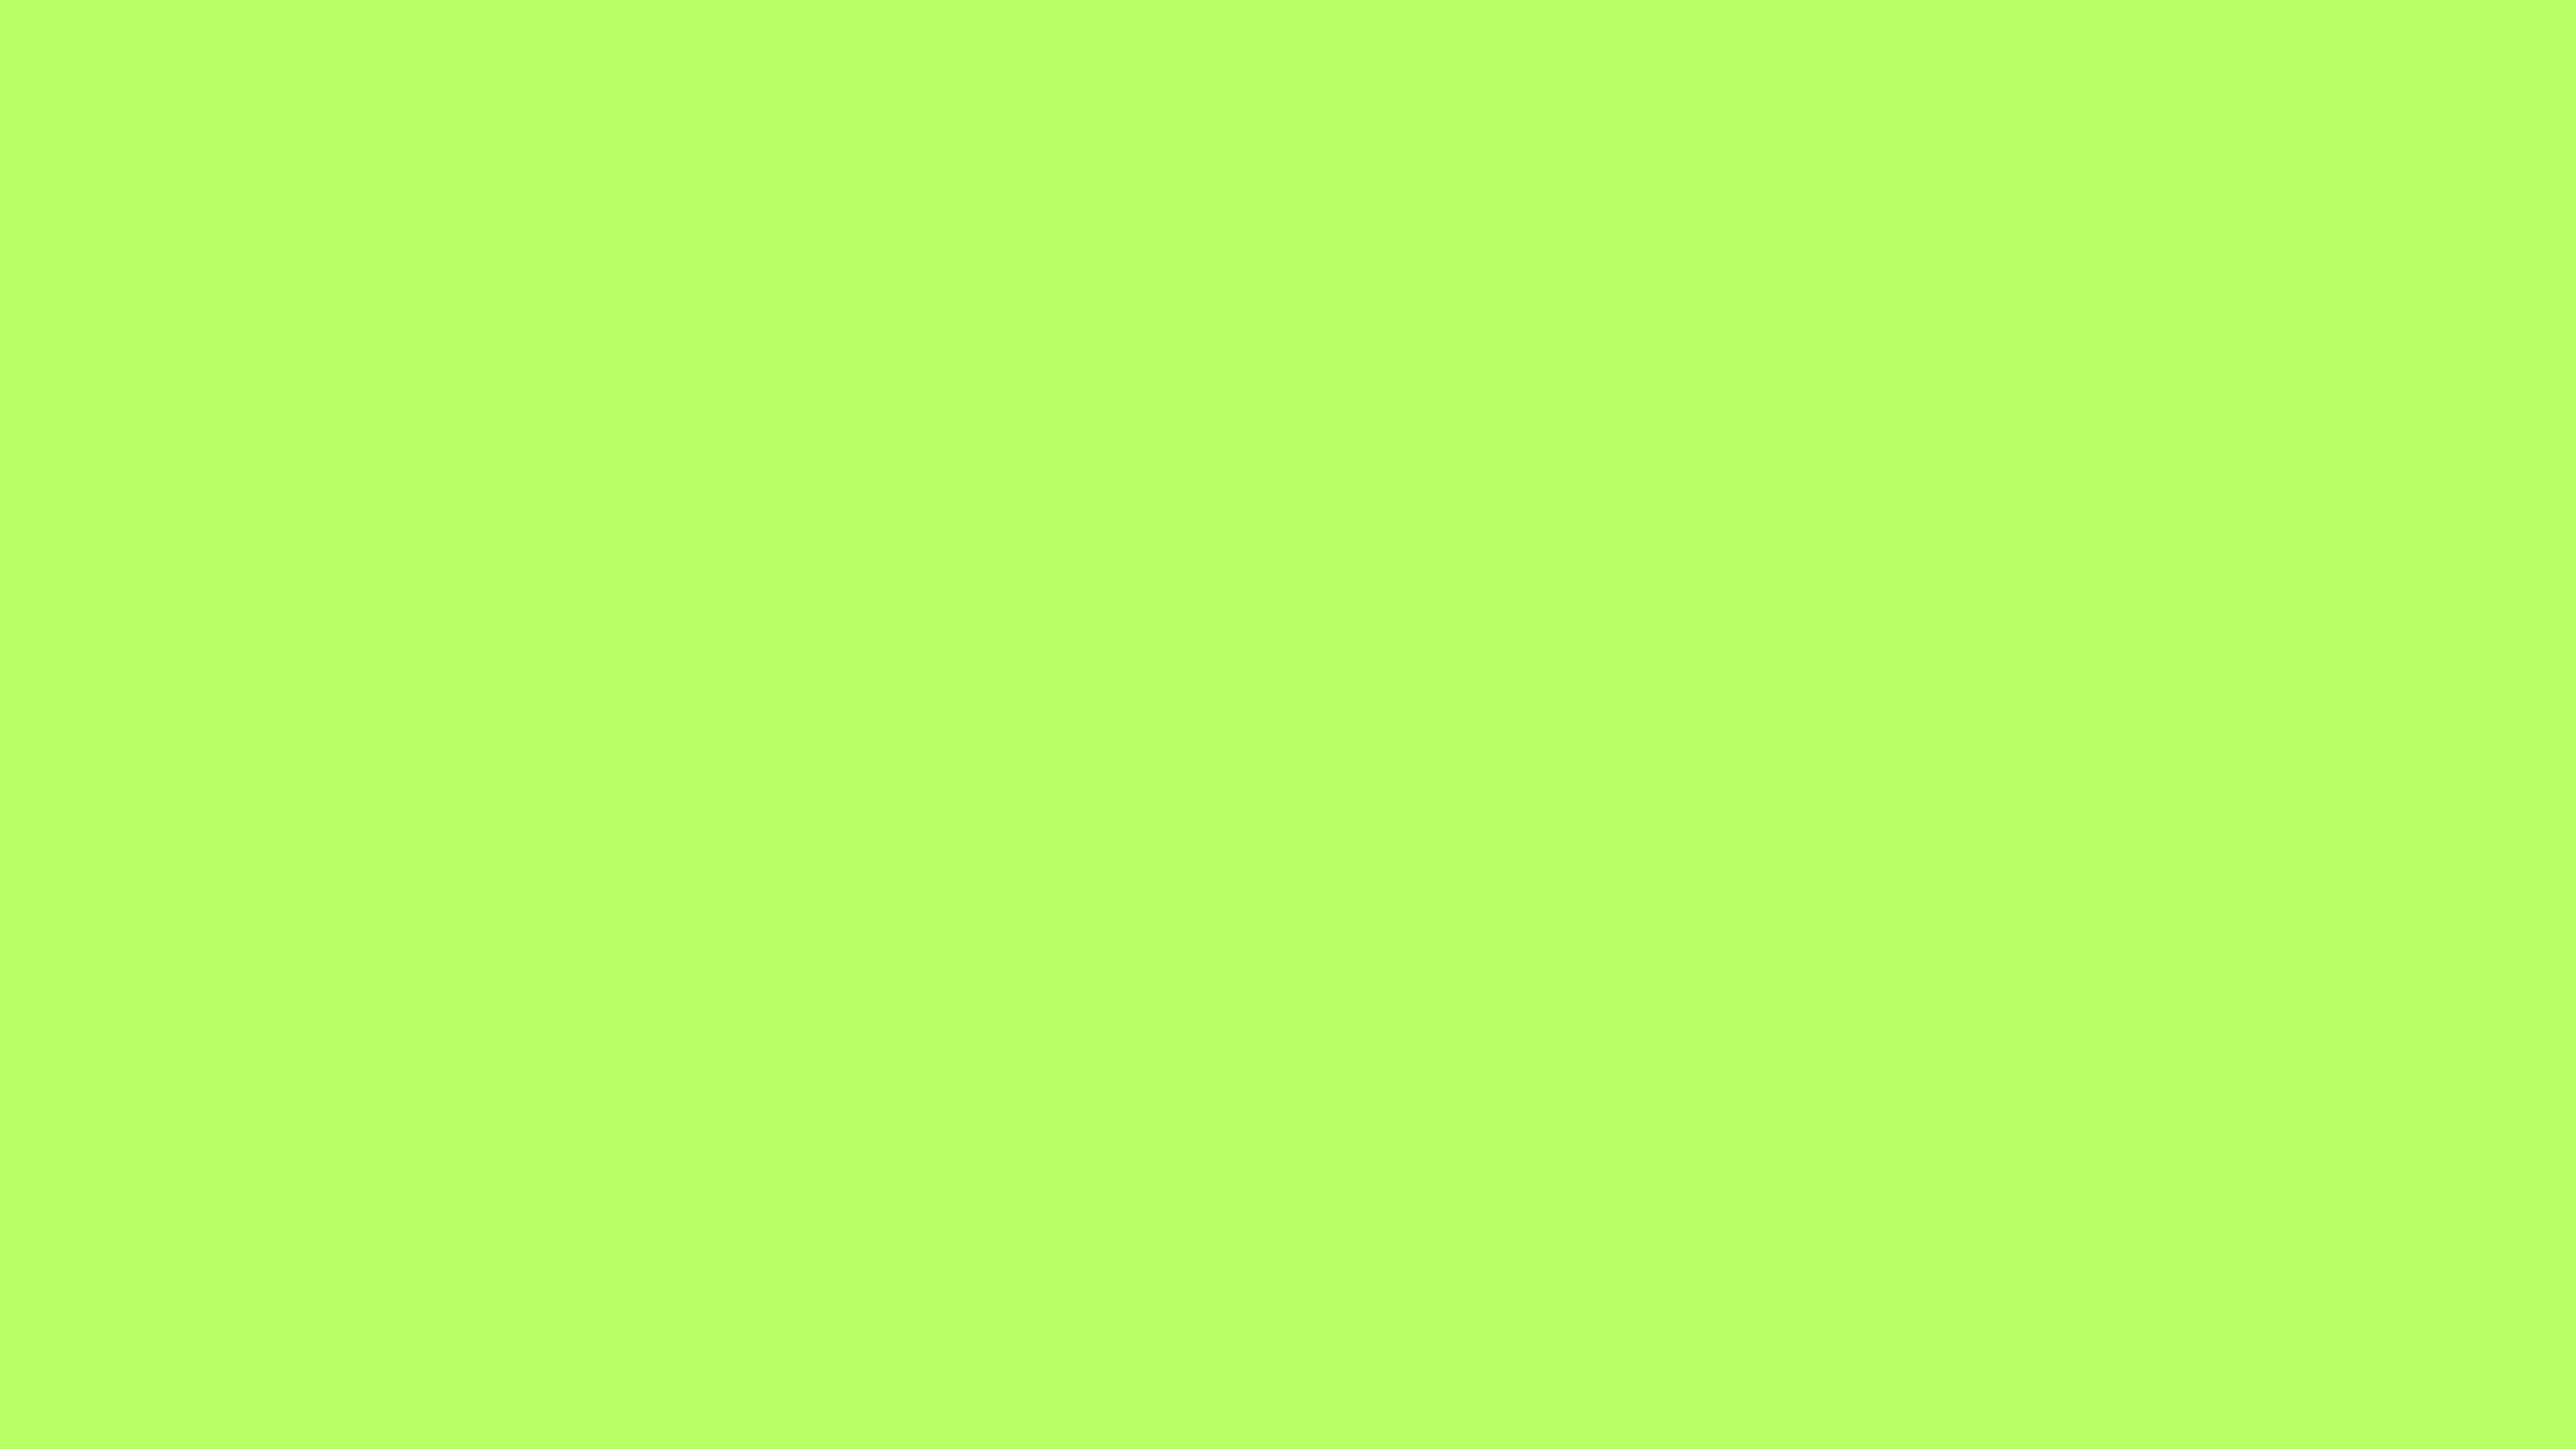 Light Lime Green Solid Color Background Image Free Image Generator